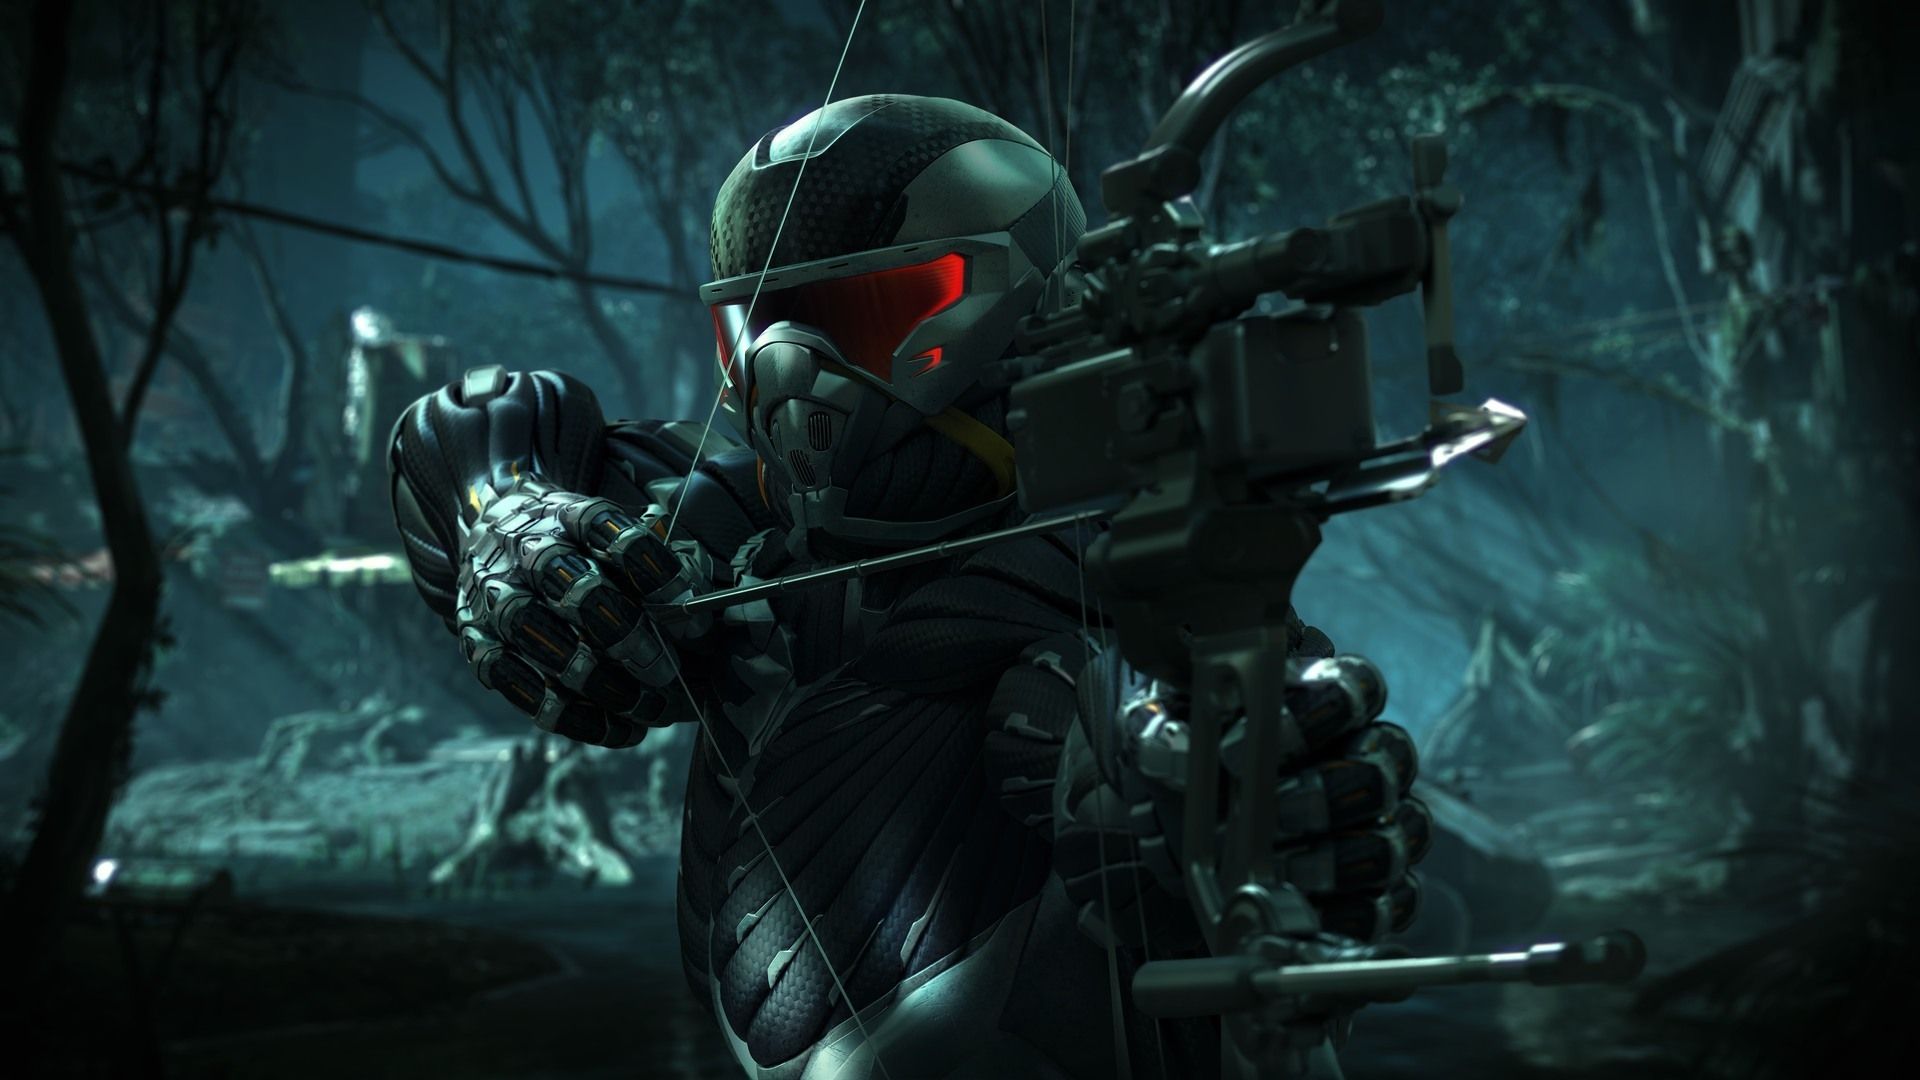 Crysis 3 free Wallpapers (9 photos) for your desktop, download ...